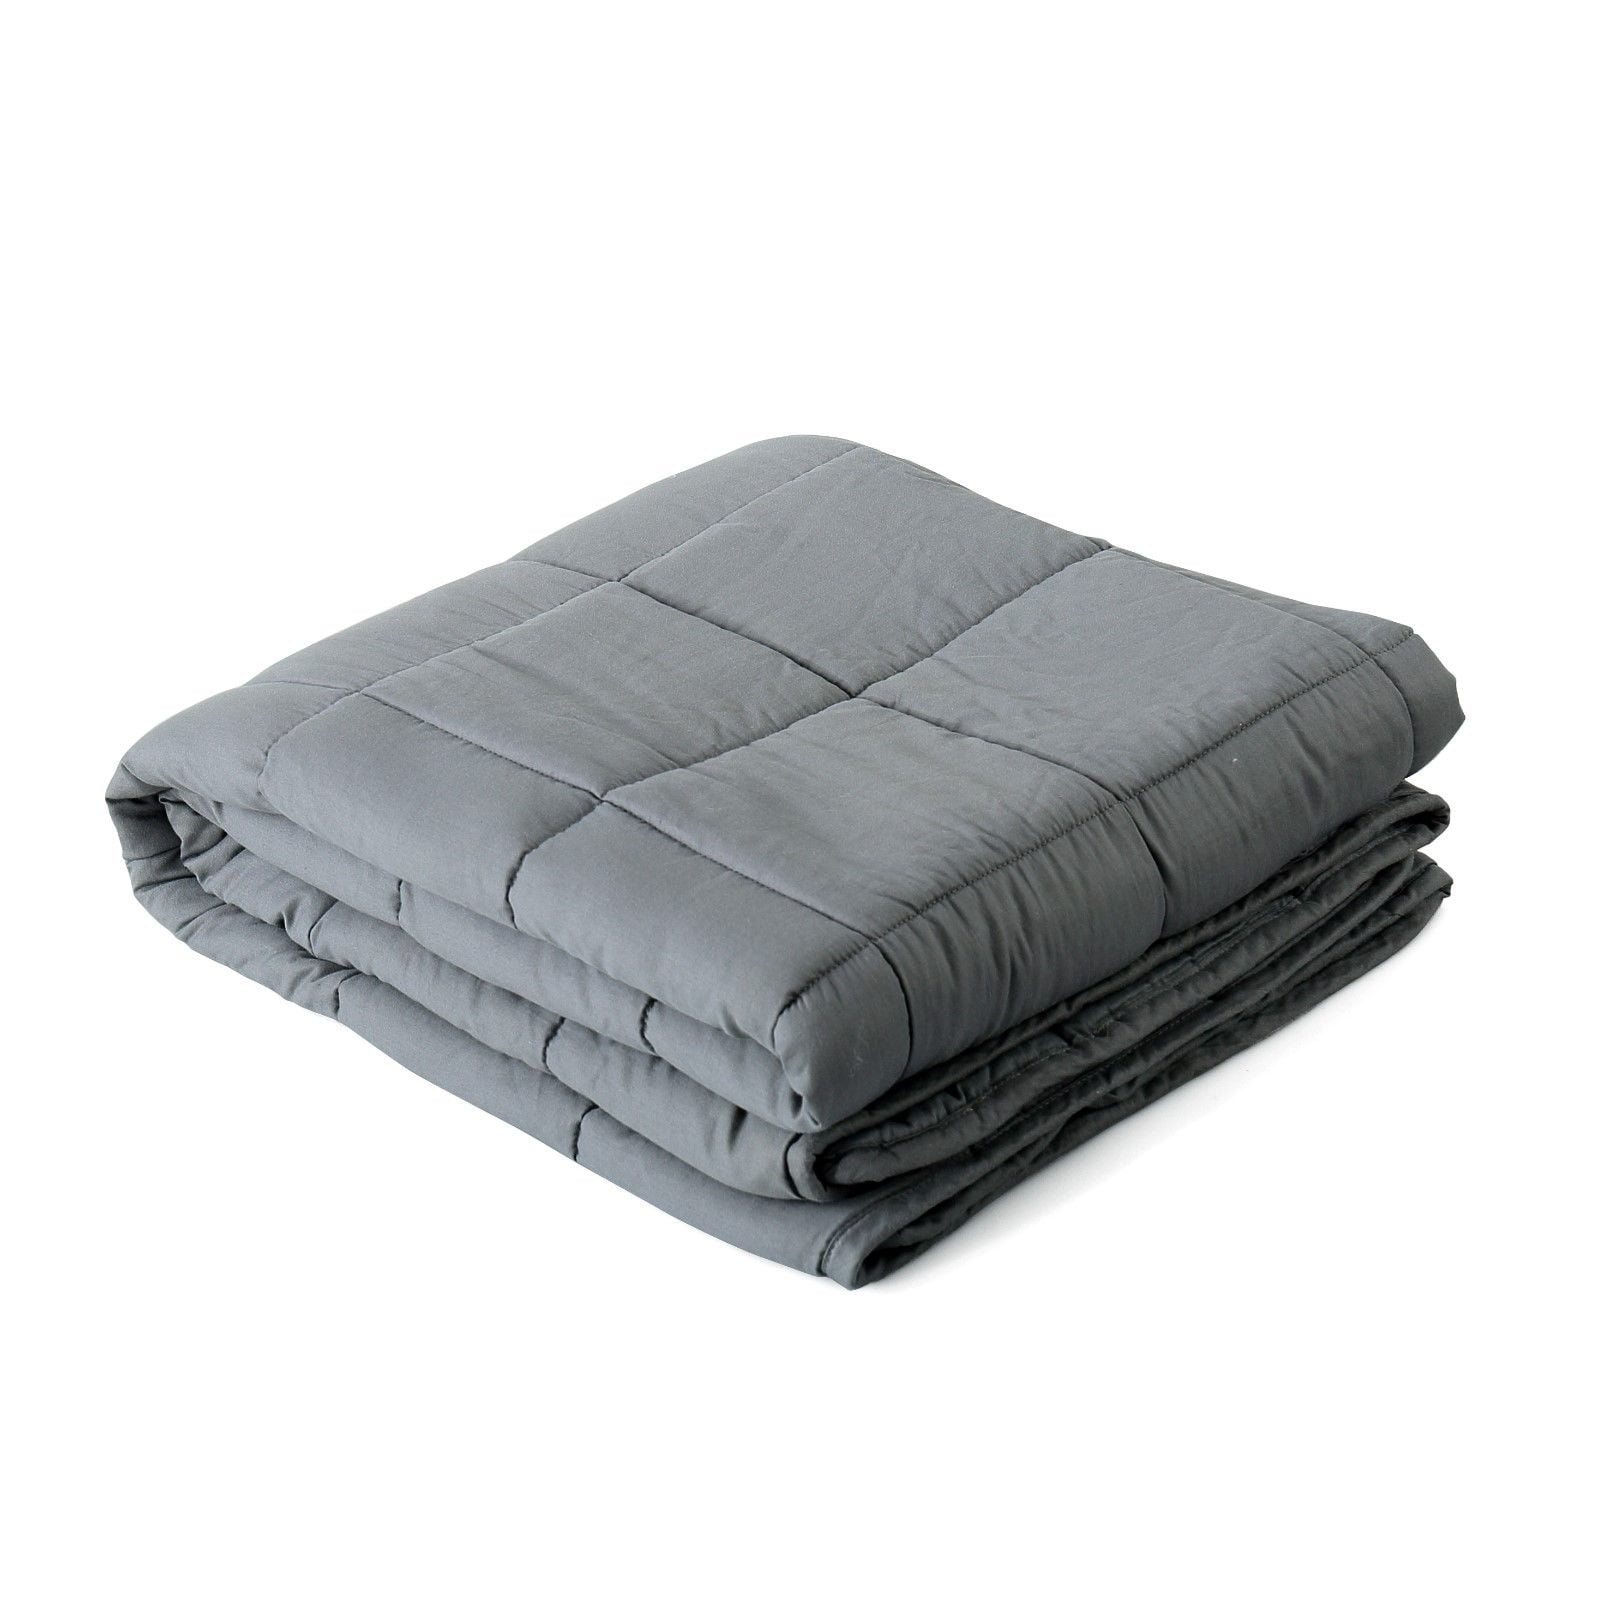 Reafort Weighted Blanket for Adult Natural Deep Sleep, Reduce Stress